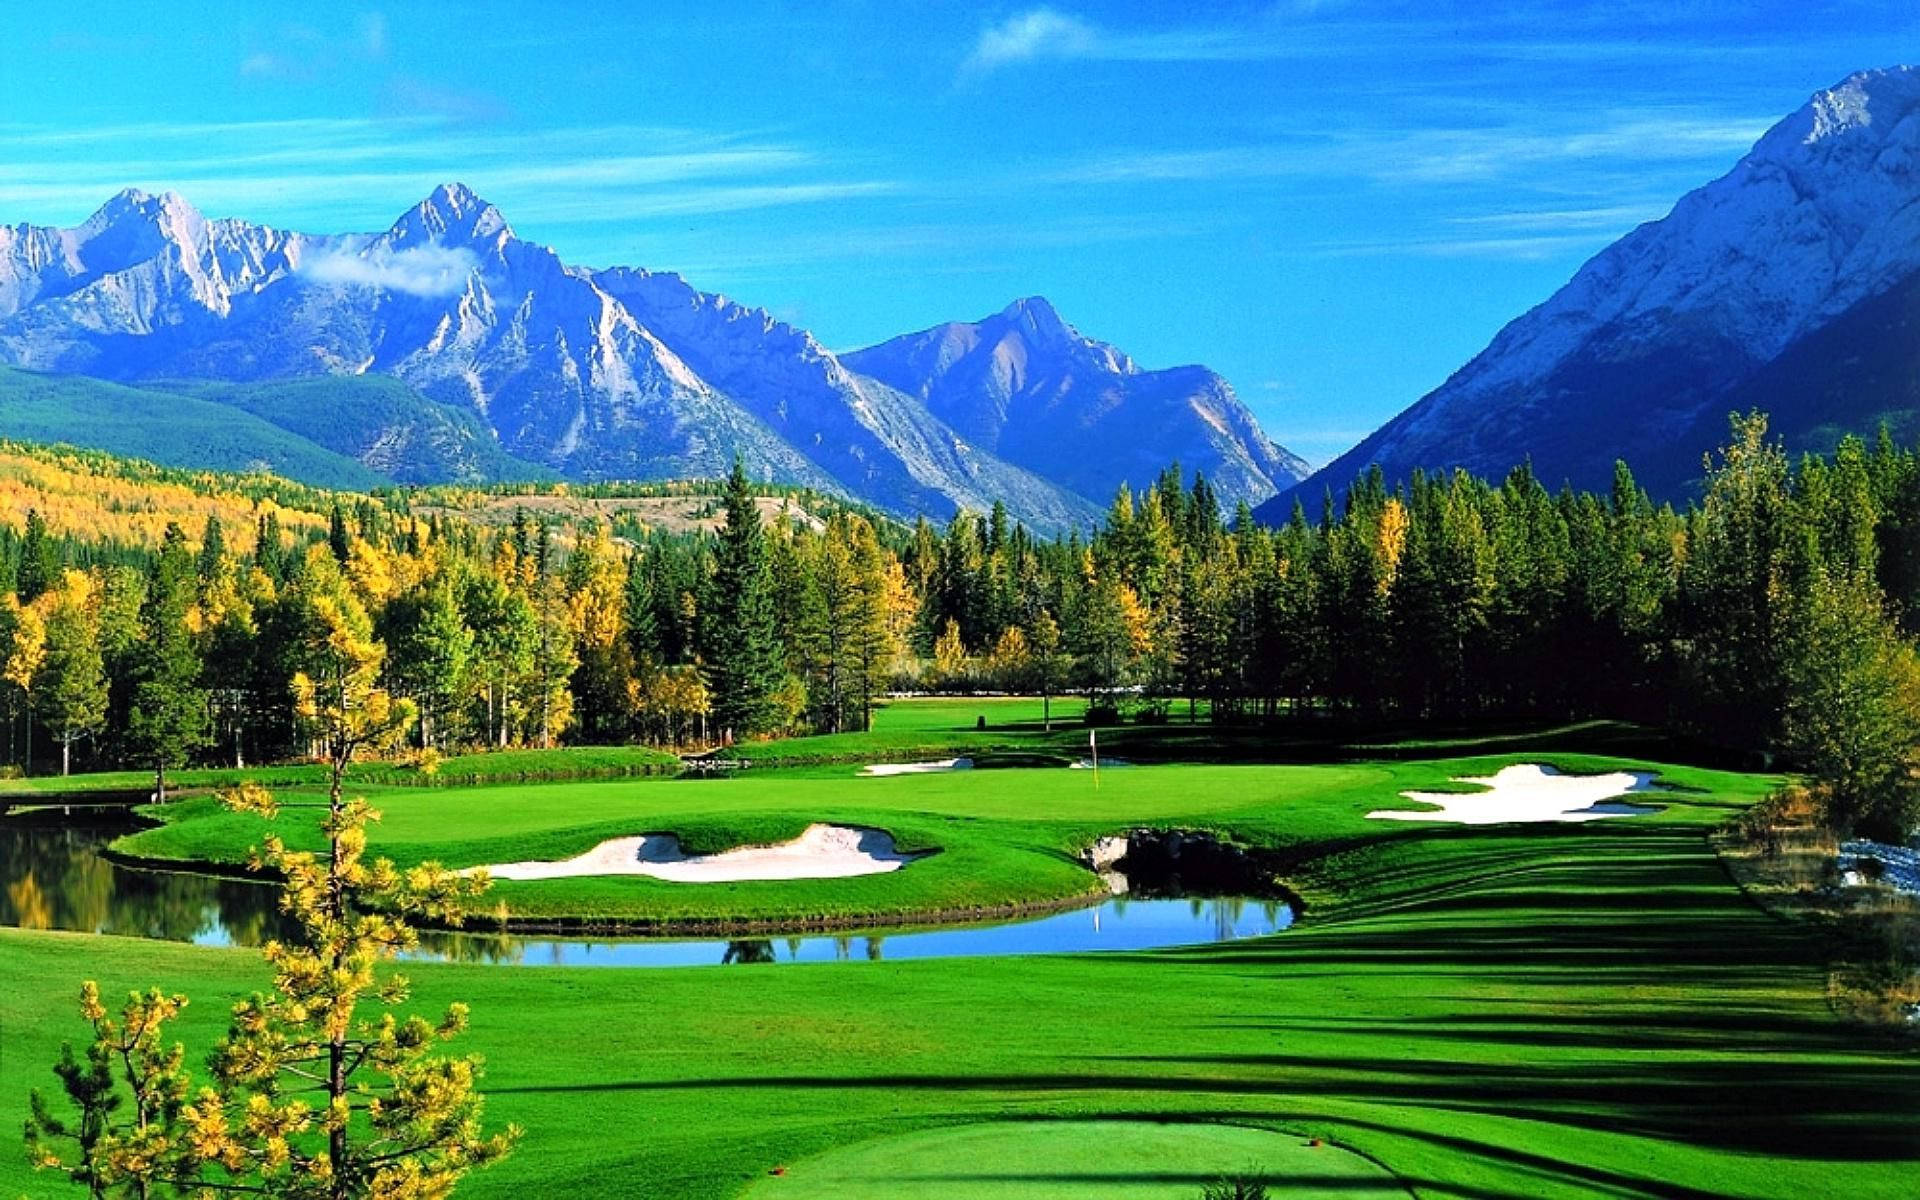 Cool Golf Kananaskis Country Course With Mountains Background